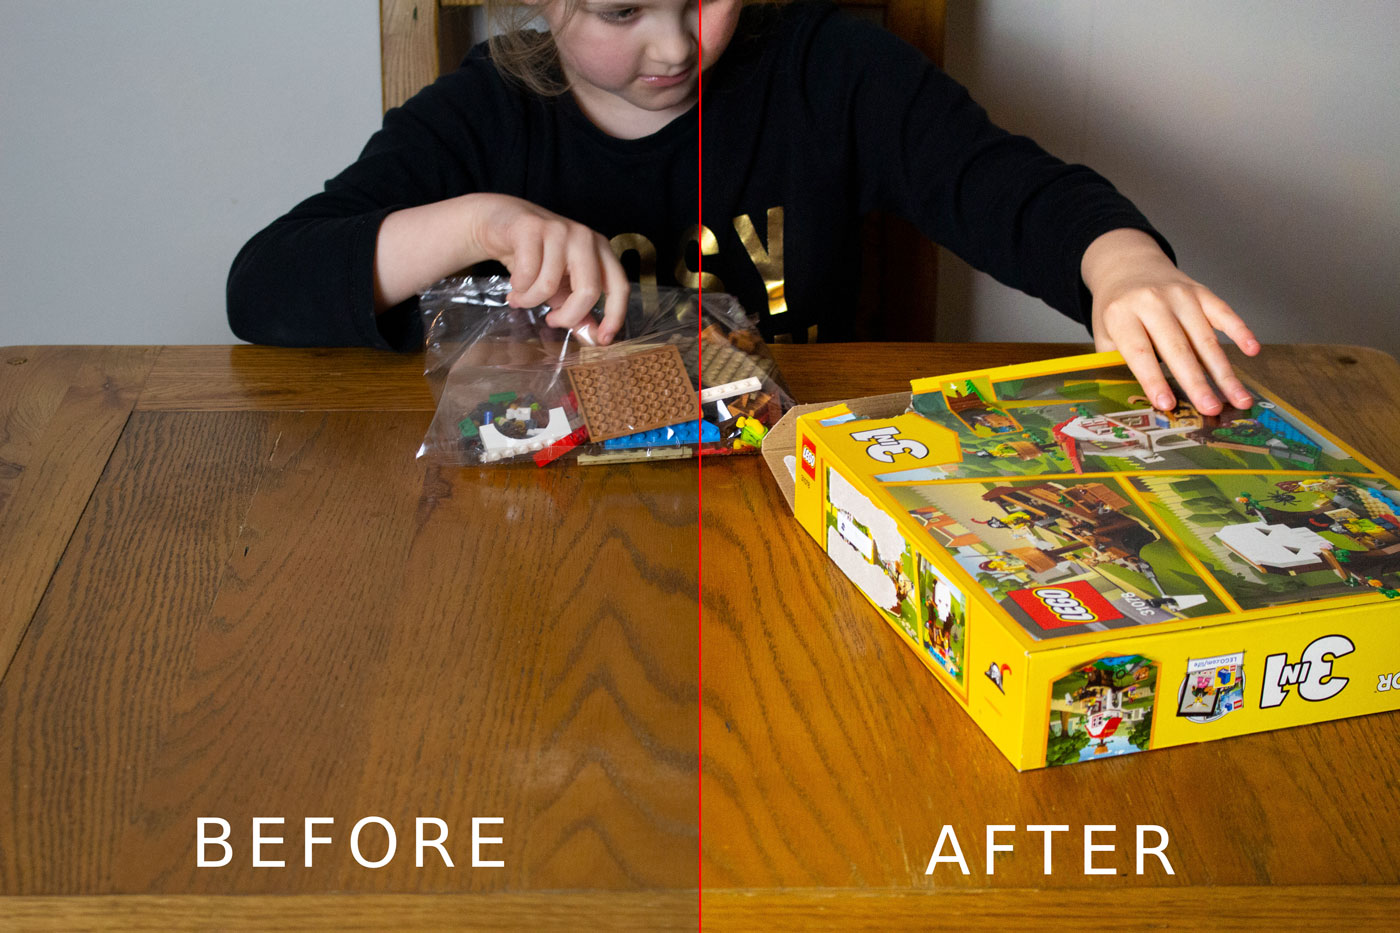 Before and after Image processing